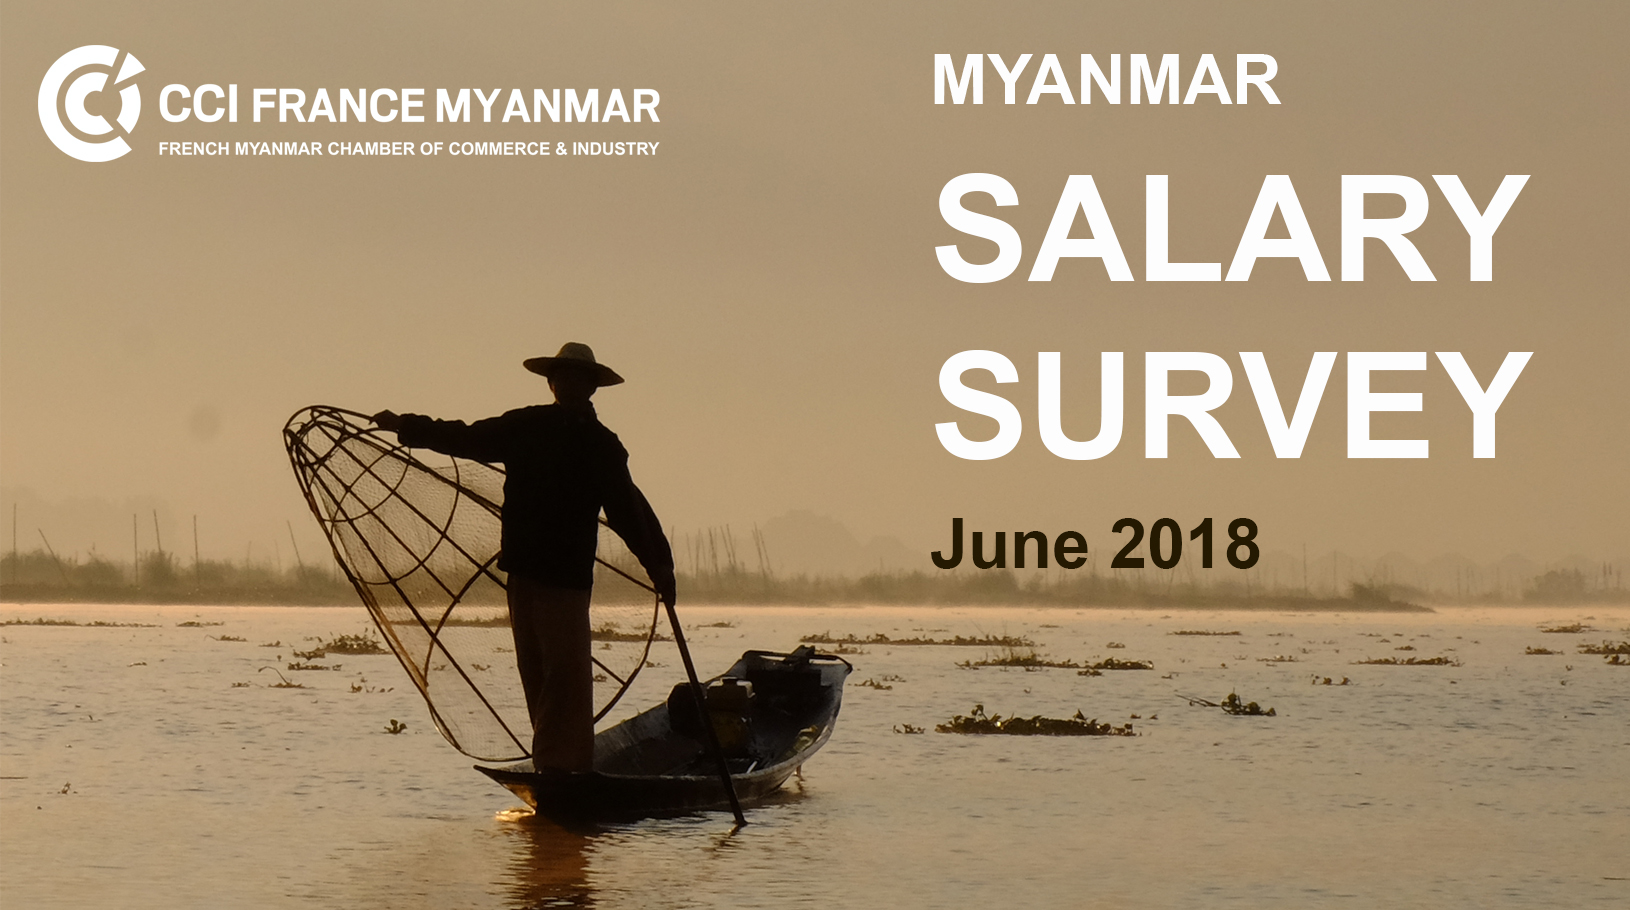 The first extensive anonymous salary survey by CCI France Myanmar